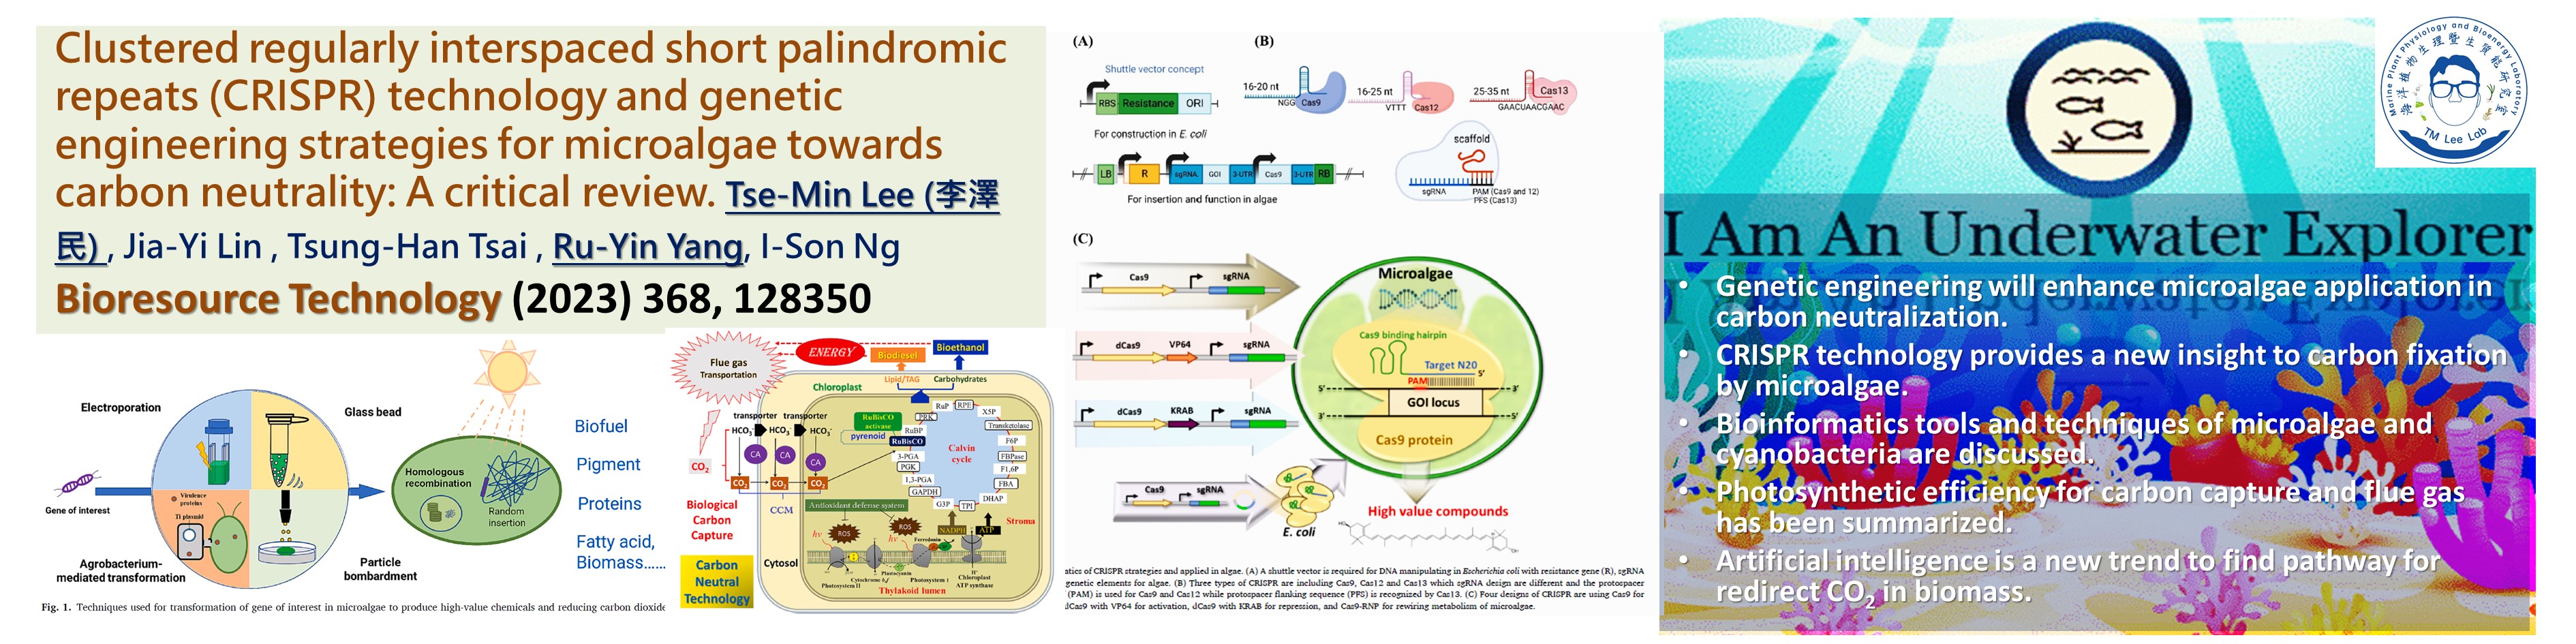 Clustered regularly interspaced short palindromic repeats (CRISPR) technology and genetic engineering strategies for microalgae towards carbon neutrality: A critical review